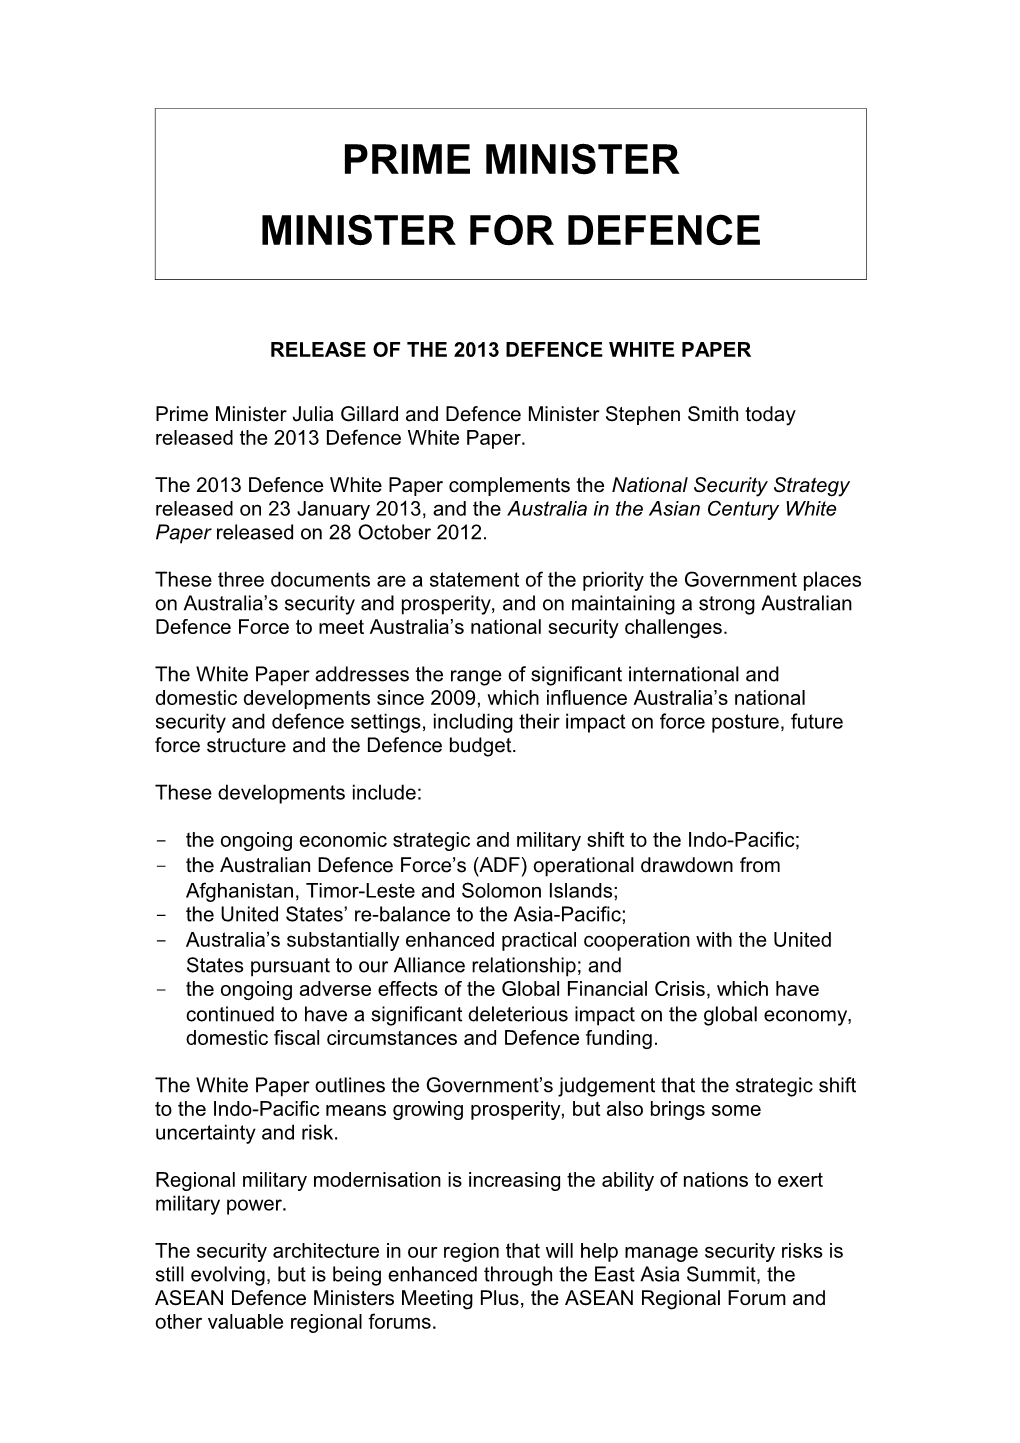 Release of the 2013 Defence White Paper